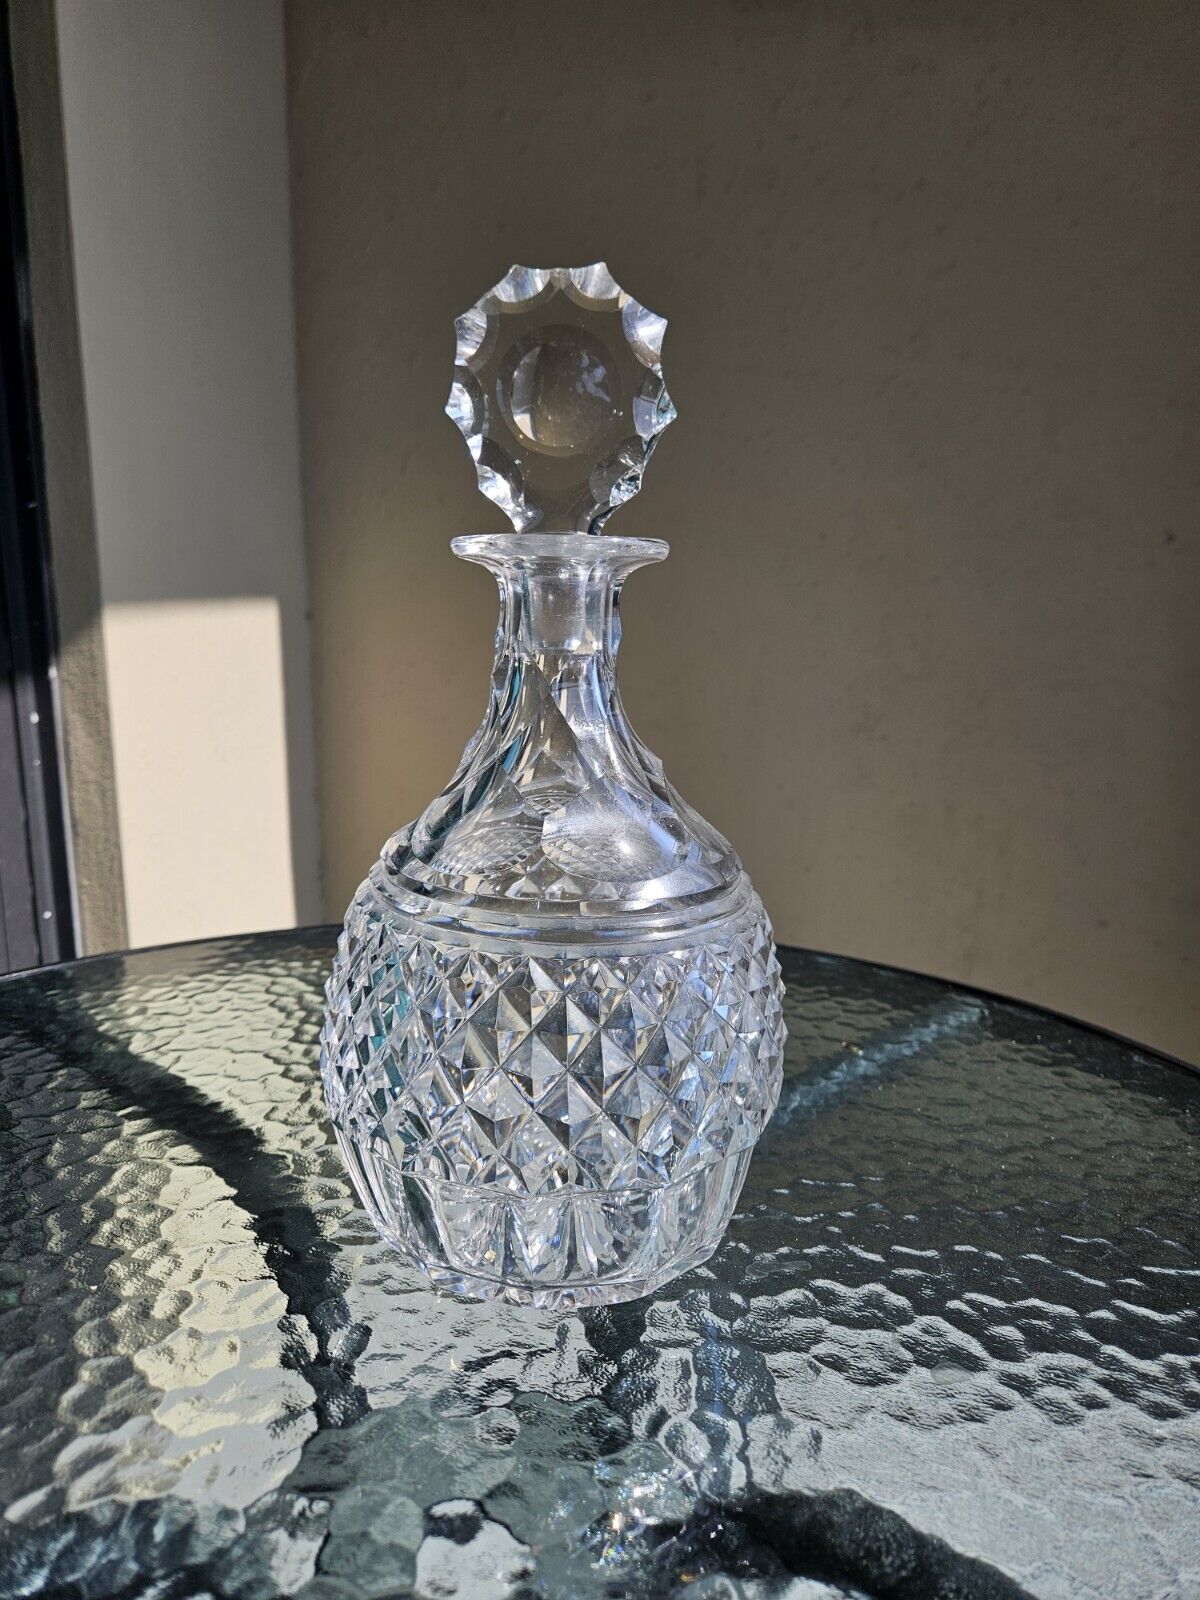 Vintage Crystal Decanter - Excellent Condition, large, cut crystal with stopper